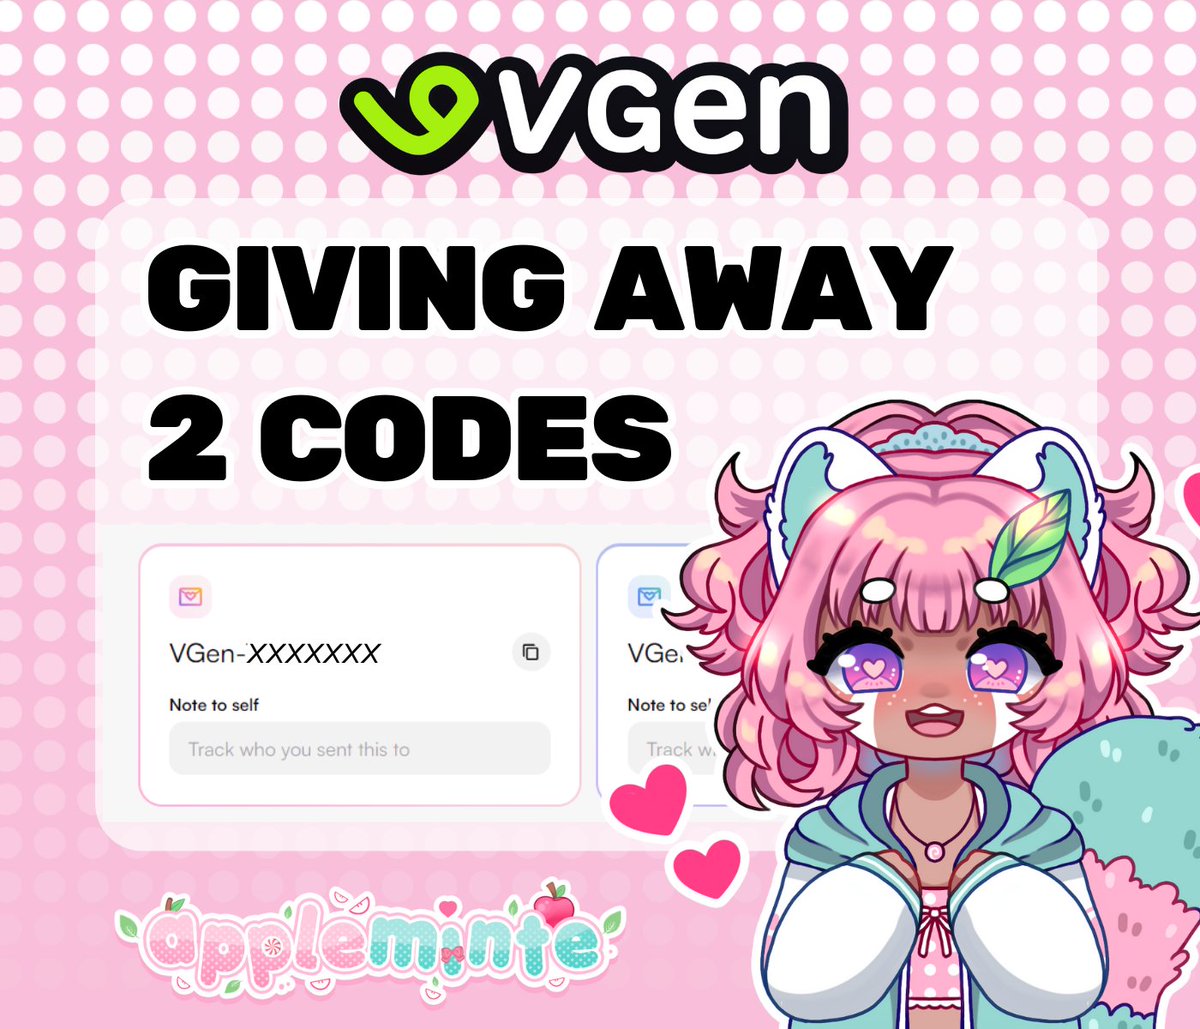 🌸Giving out 2 codes for @_vgen_ 🌸 

🩷Like
🔁Retweet
🎨Drop your art!  

Following not necessary I'd really appreciate it!

Picking 2 people in 24 hours~ ଘ(੭*ˊᵕˋ)੭* ̀ˋ
#VGenCode #vgen